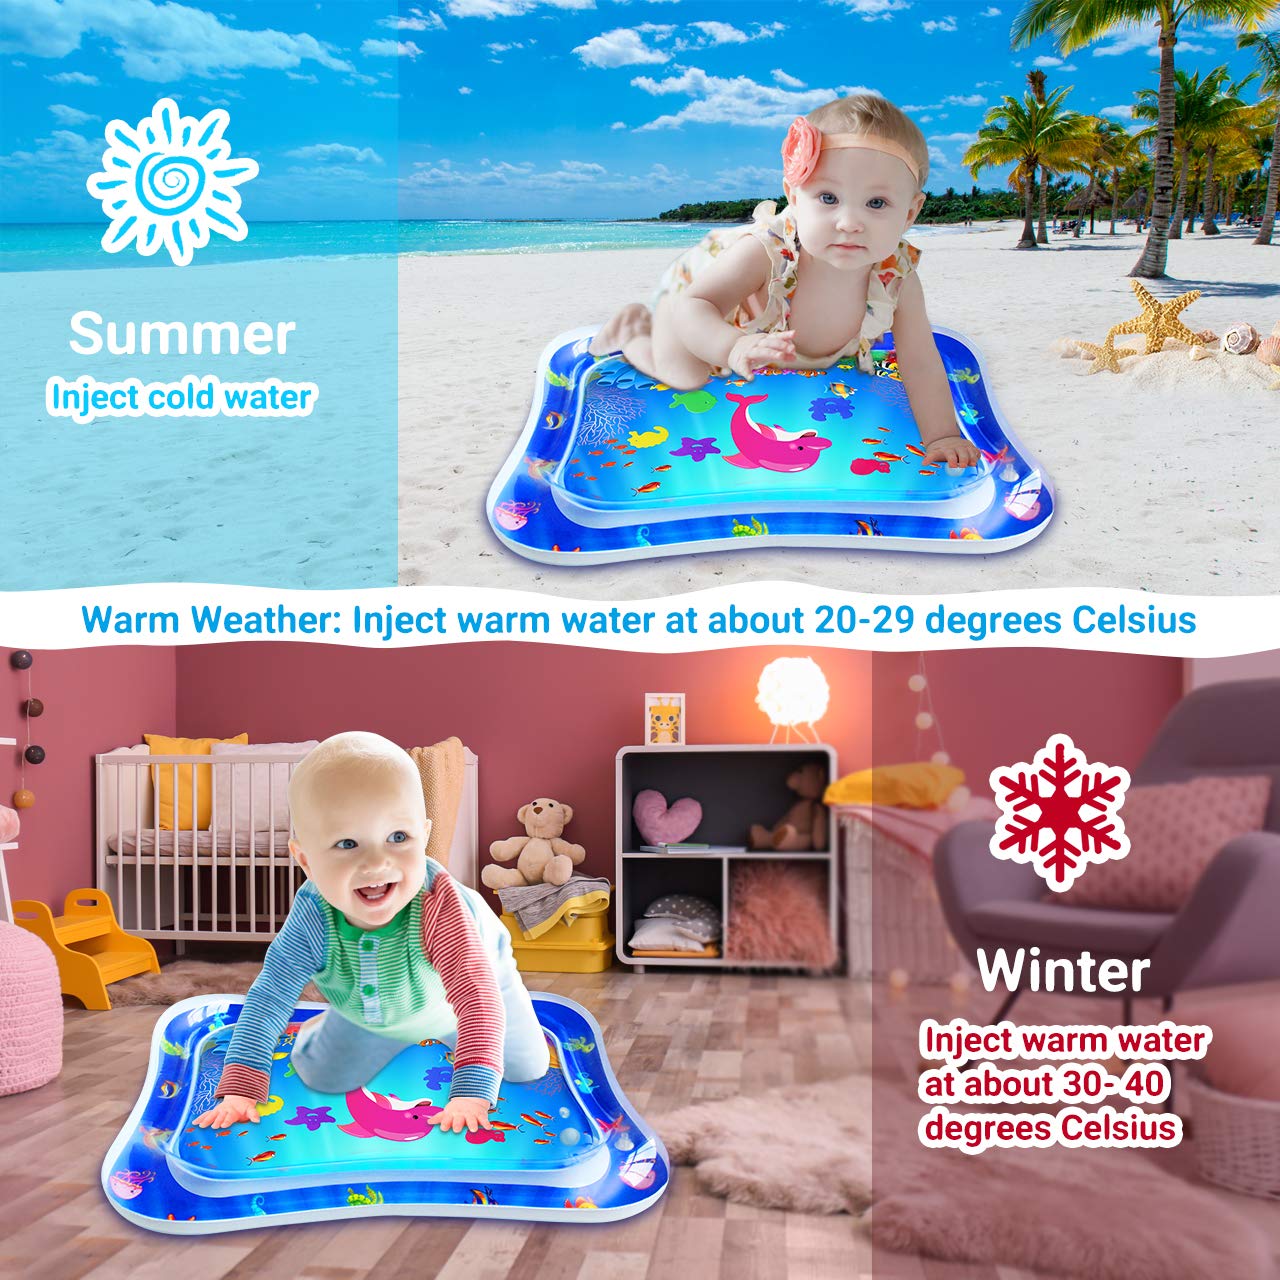 ZMLM Baby Tummy-Time Water Mat: Infant Toy Gift Activity Play Mat Inflatable Sensory Playmat Babies Belly Time Pat Indoor Small Pad for 3 6 9 Month Newborn Boy Girl Toddler Fun Game